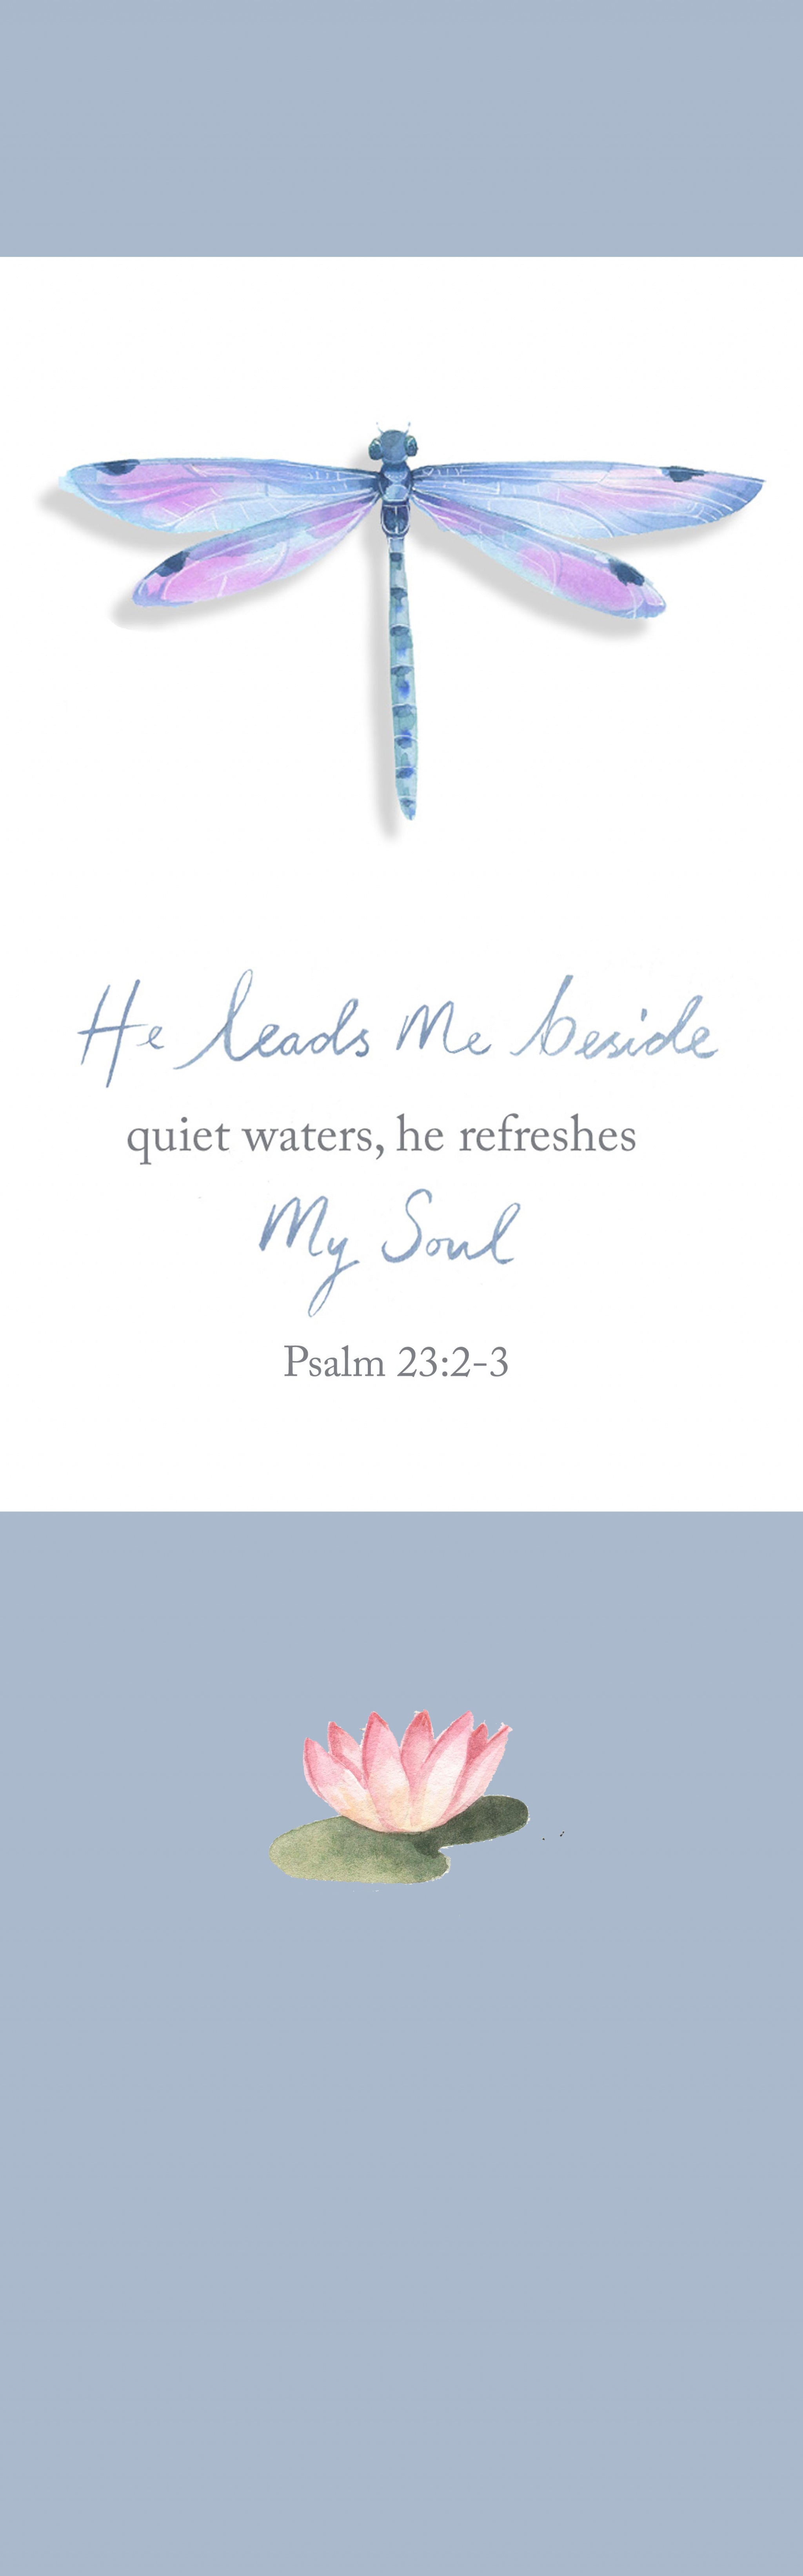 Image of Waters Bookmark other